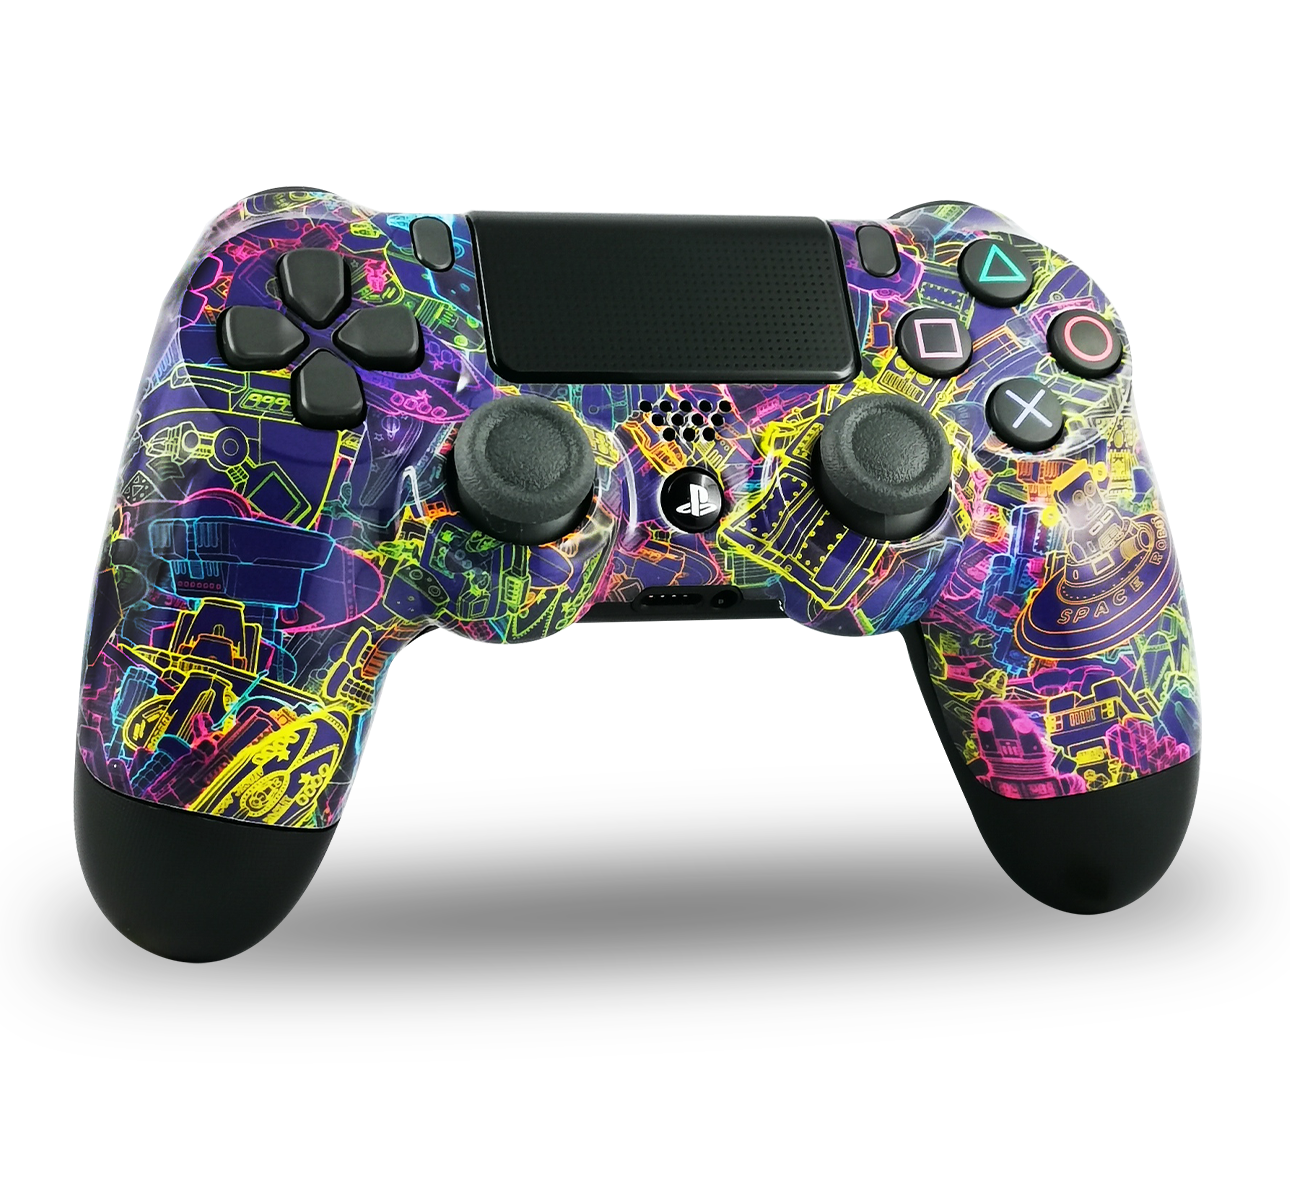 manette-PS4-custom-playstation-4-sony-personnalisee-drawmypad-space-robot